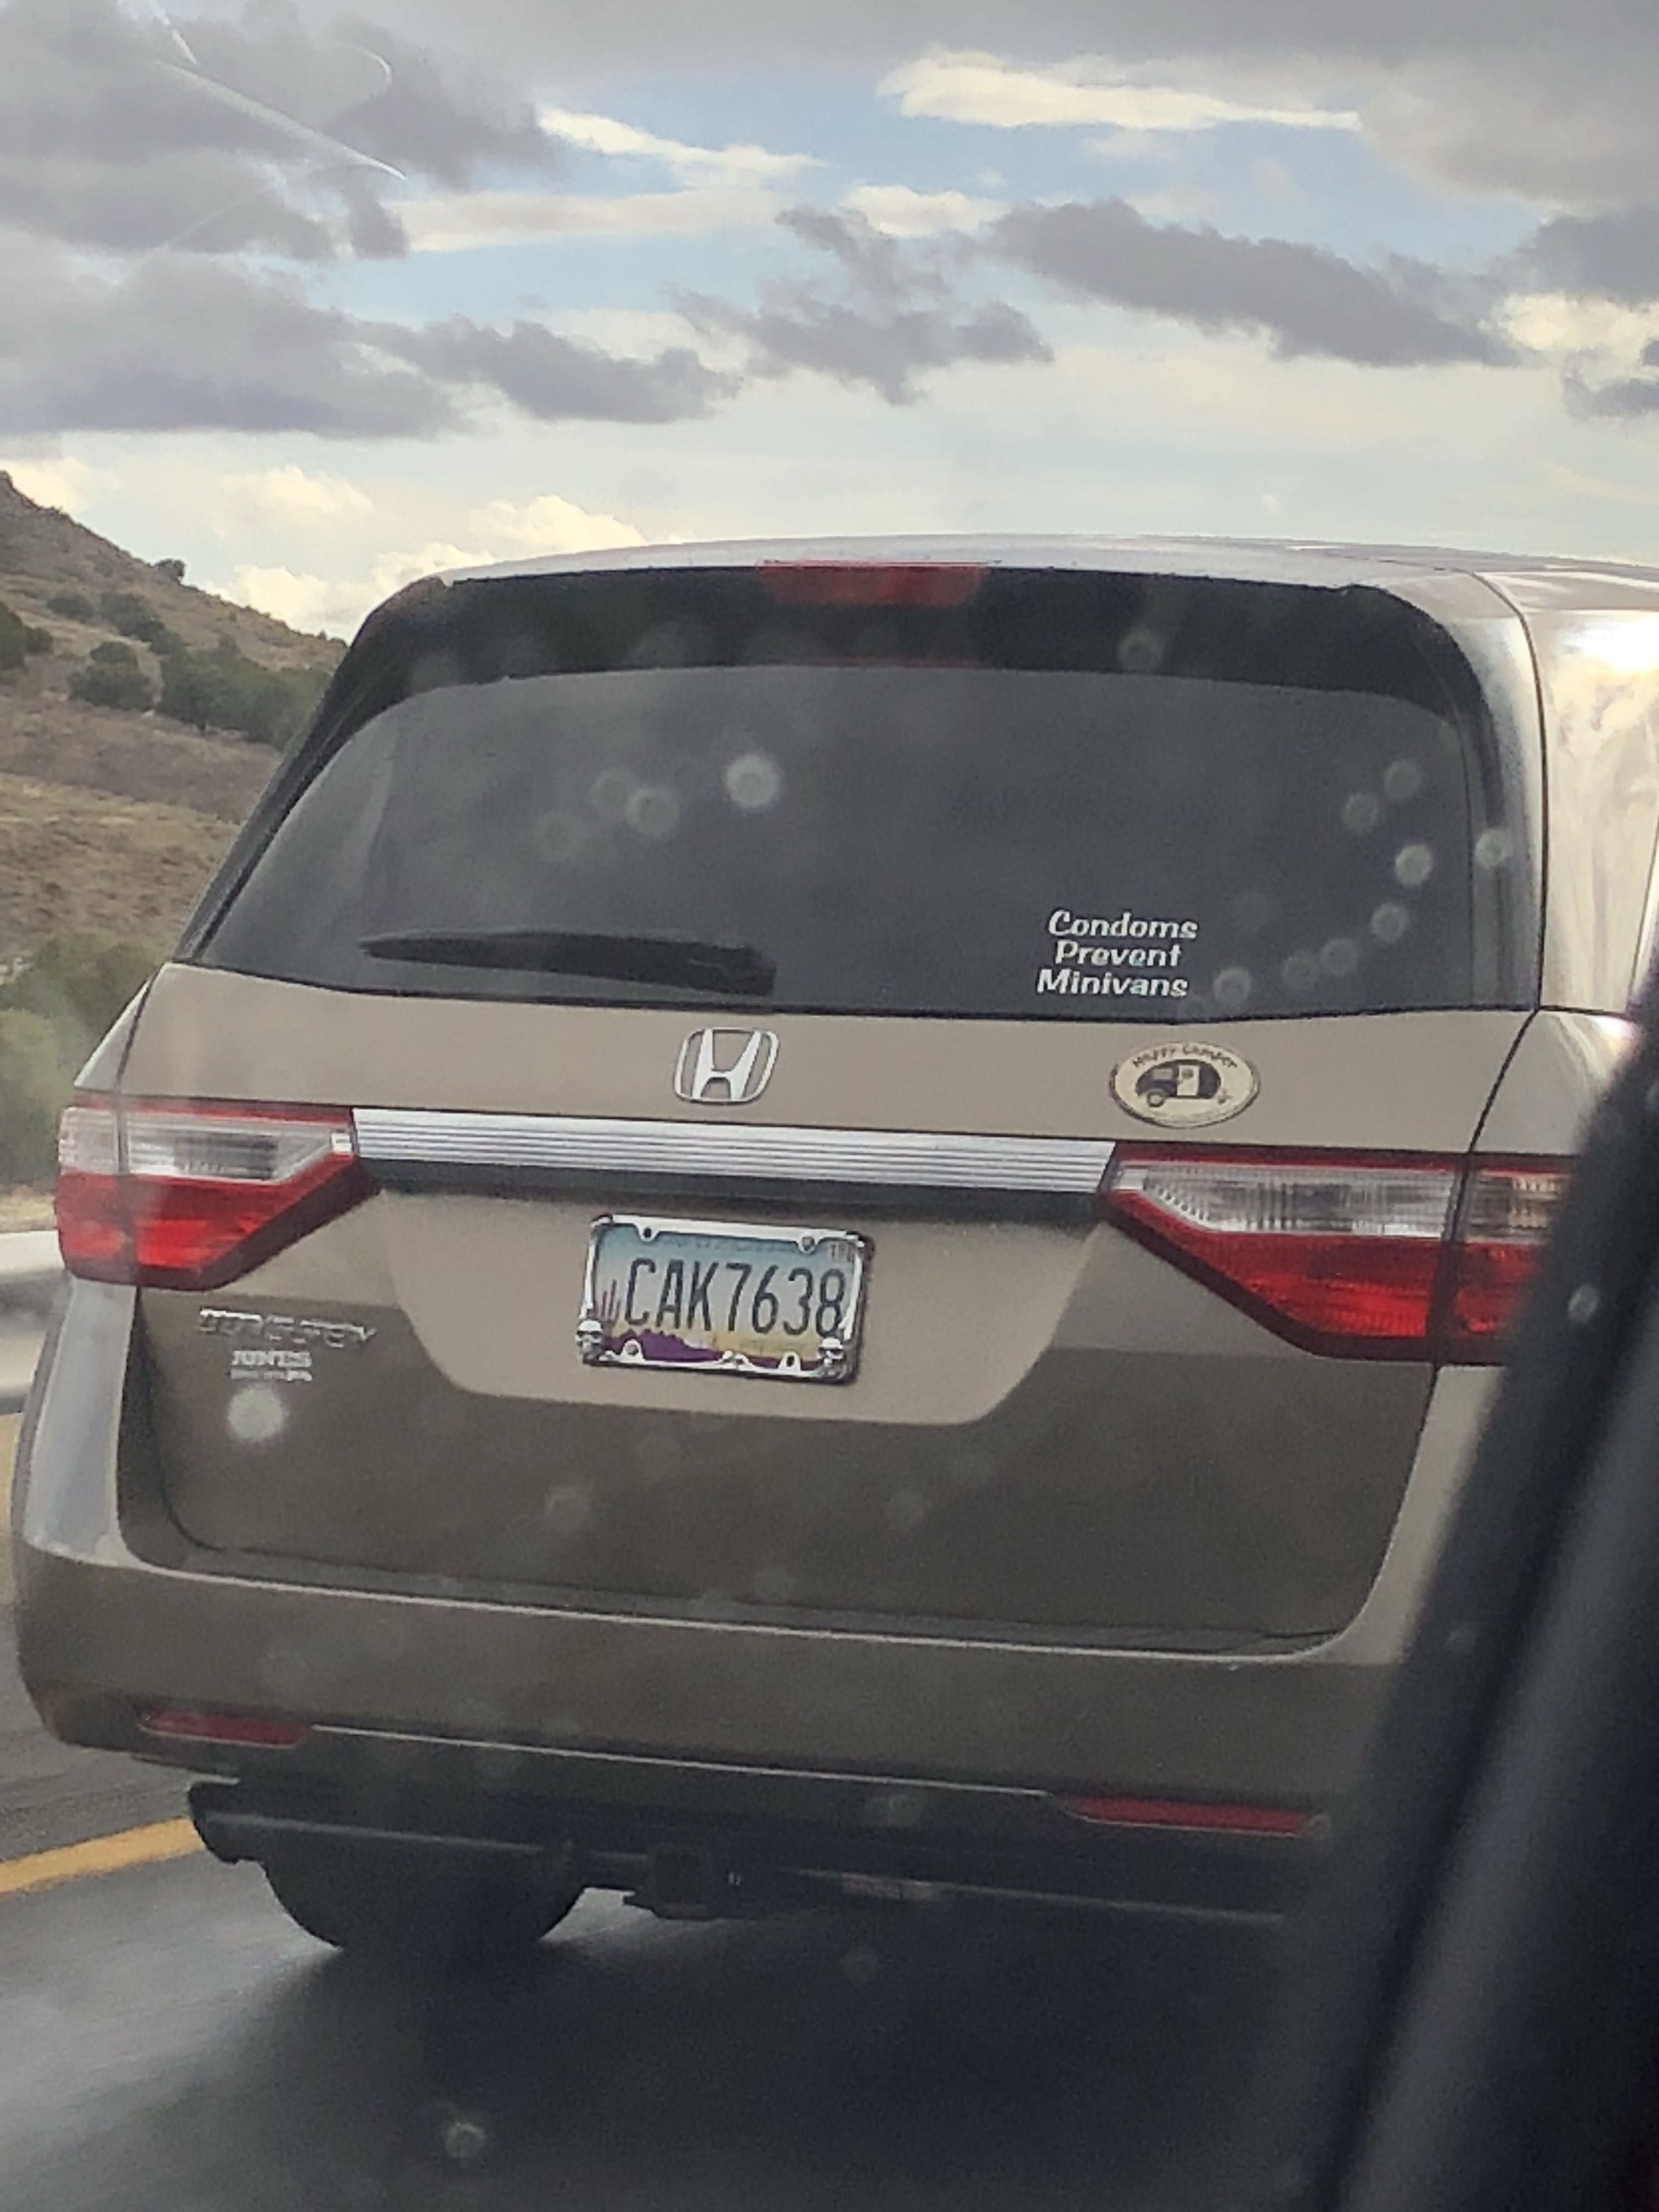 Saw this while driving in Arizona.